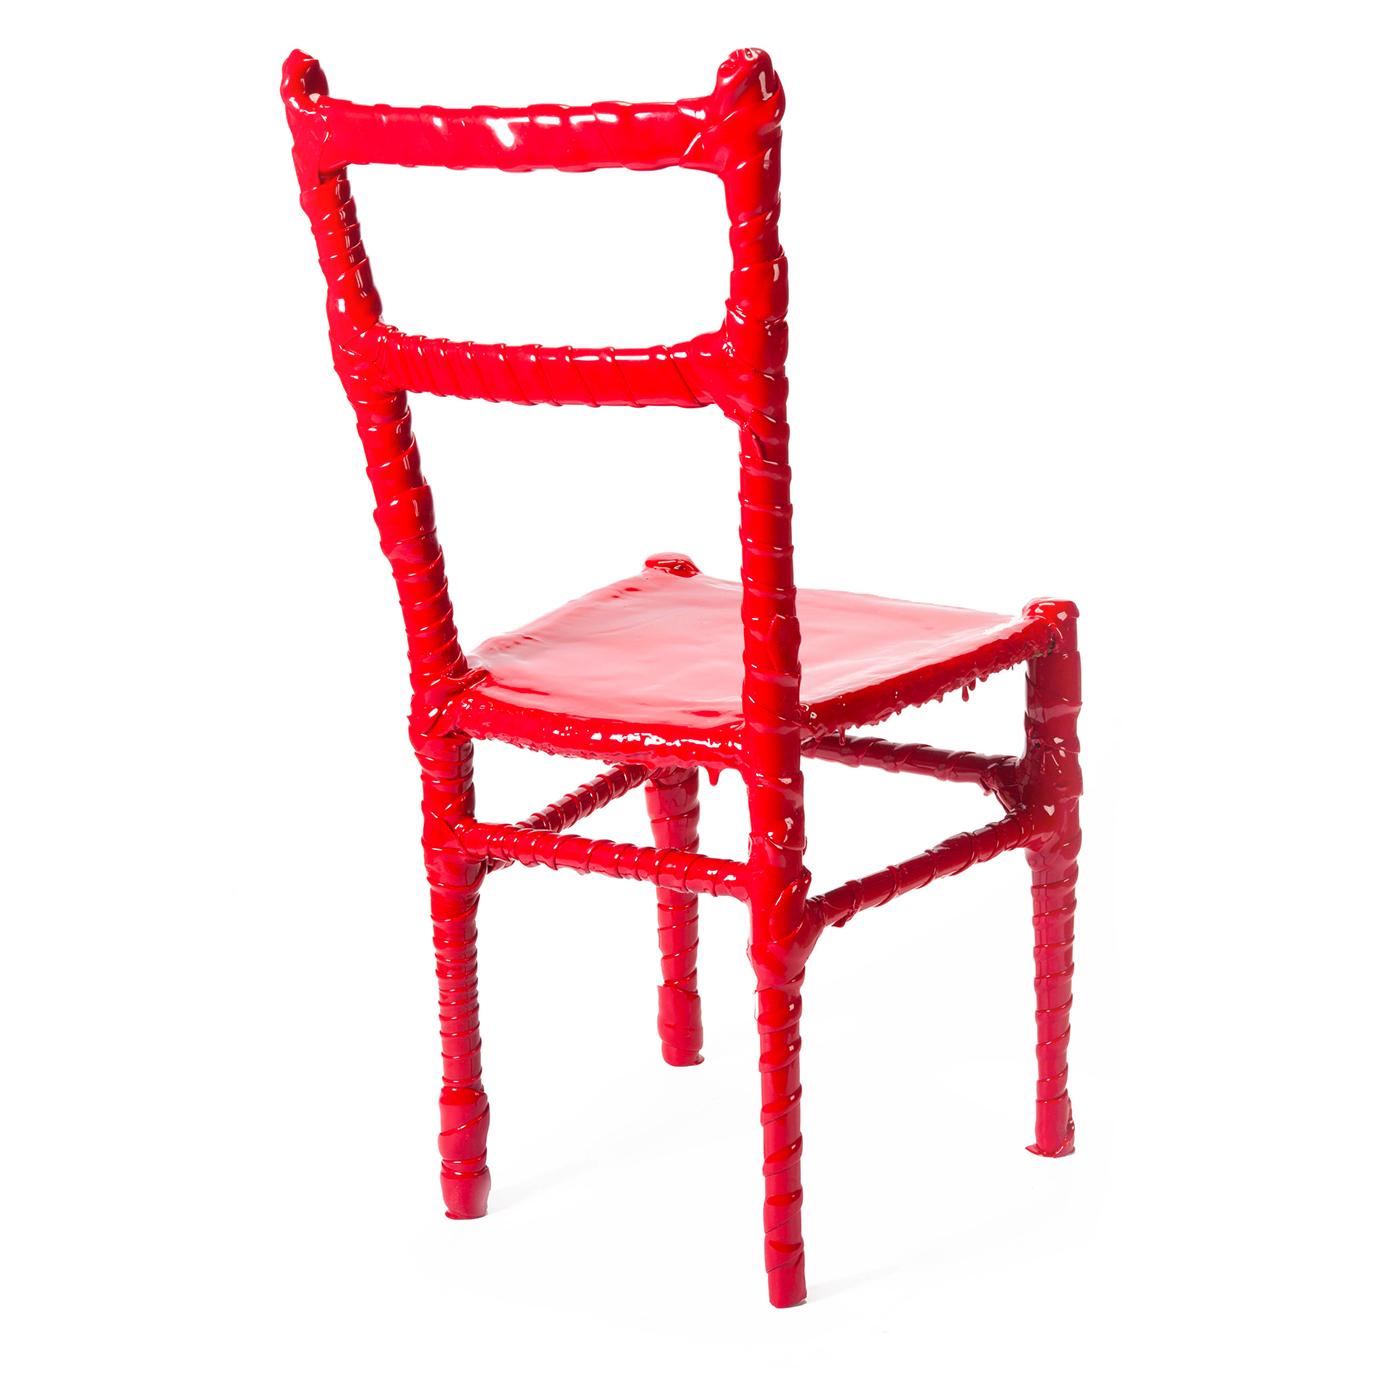 N. 03/20 One-Off Chair by Paola Navone In New Condition For Sale In Milan, IT